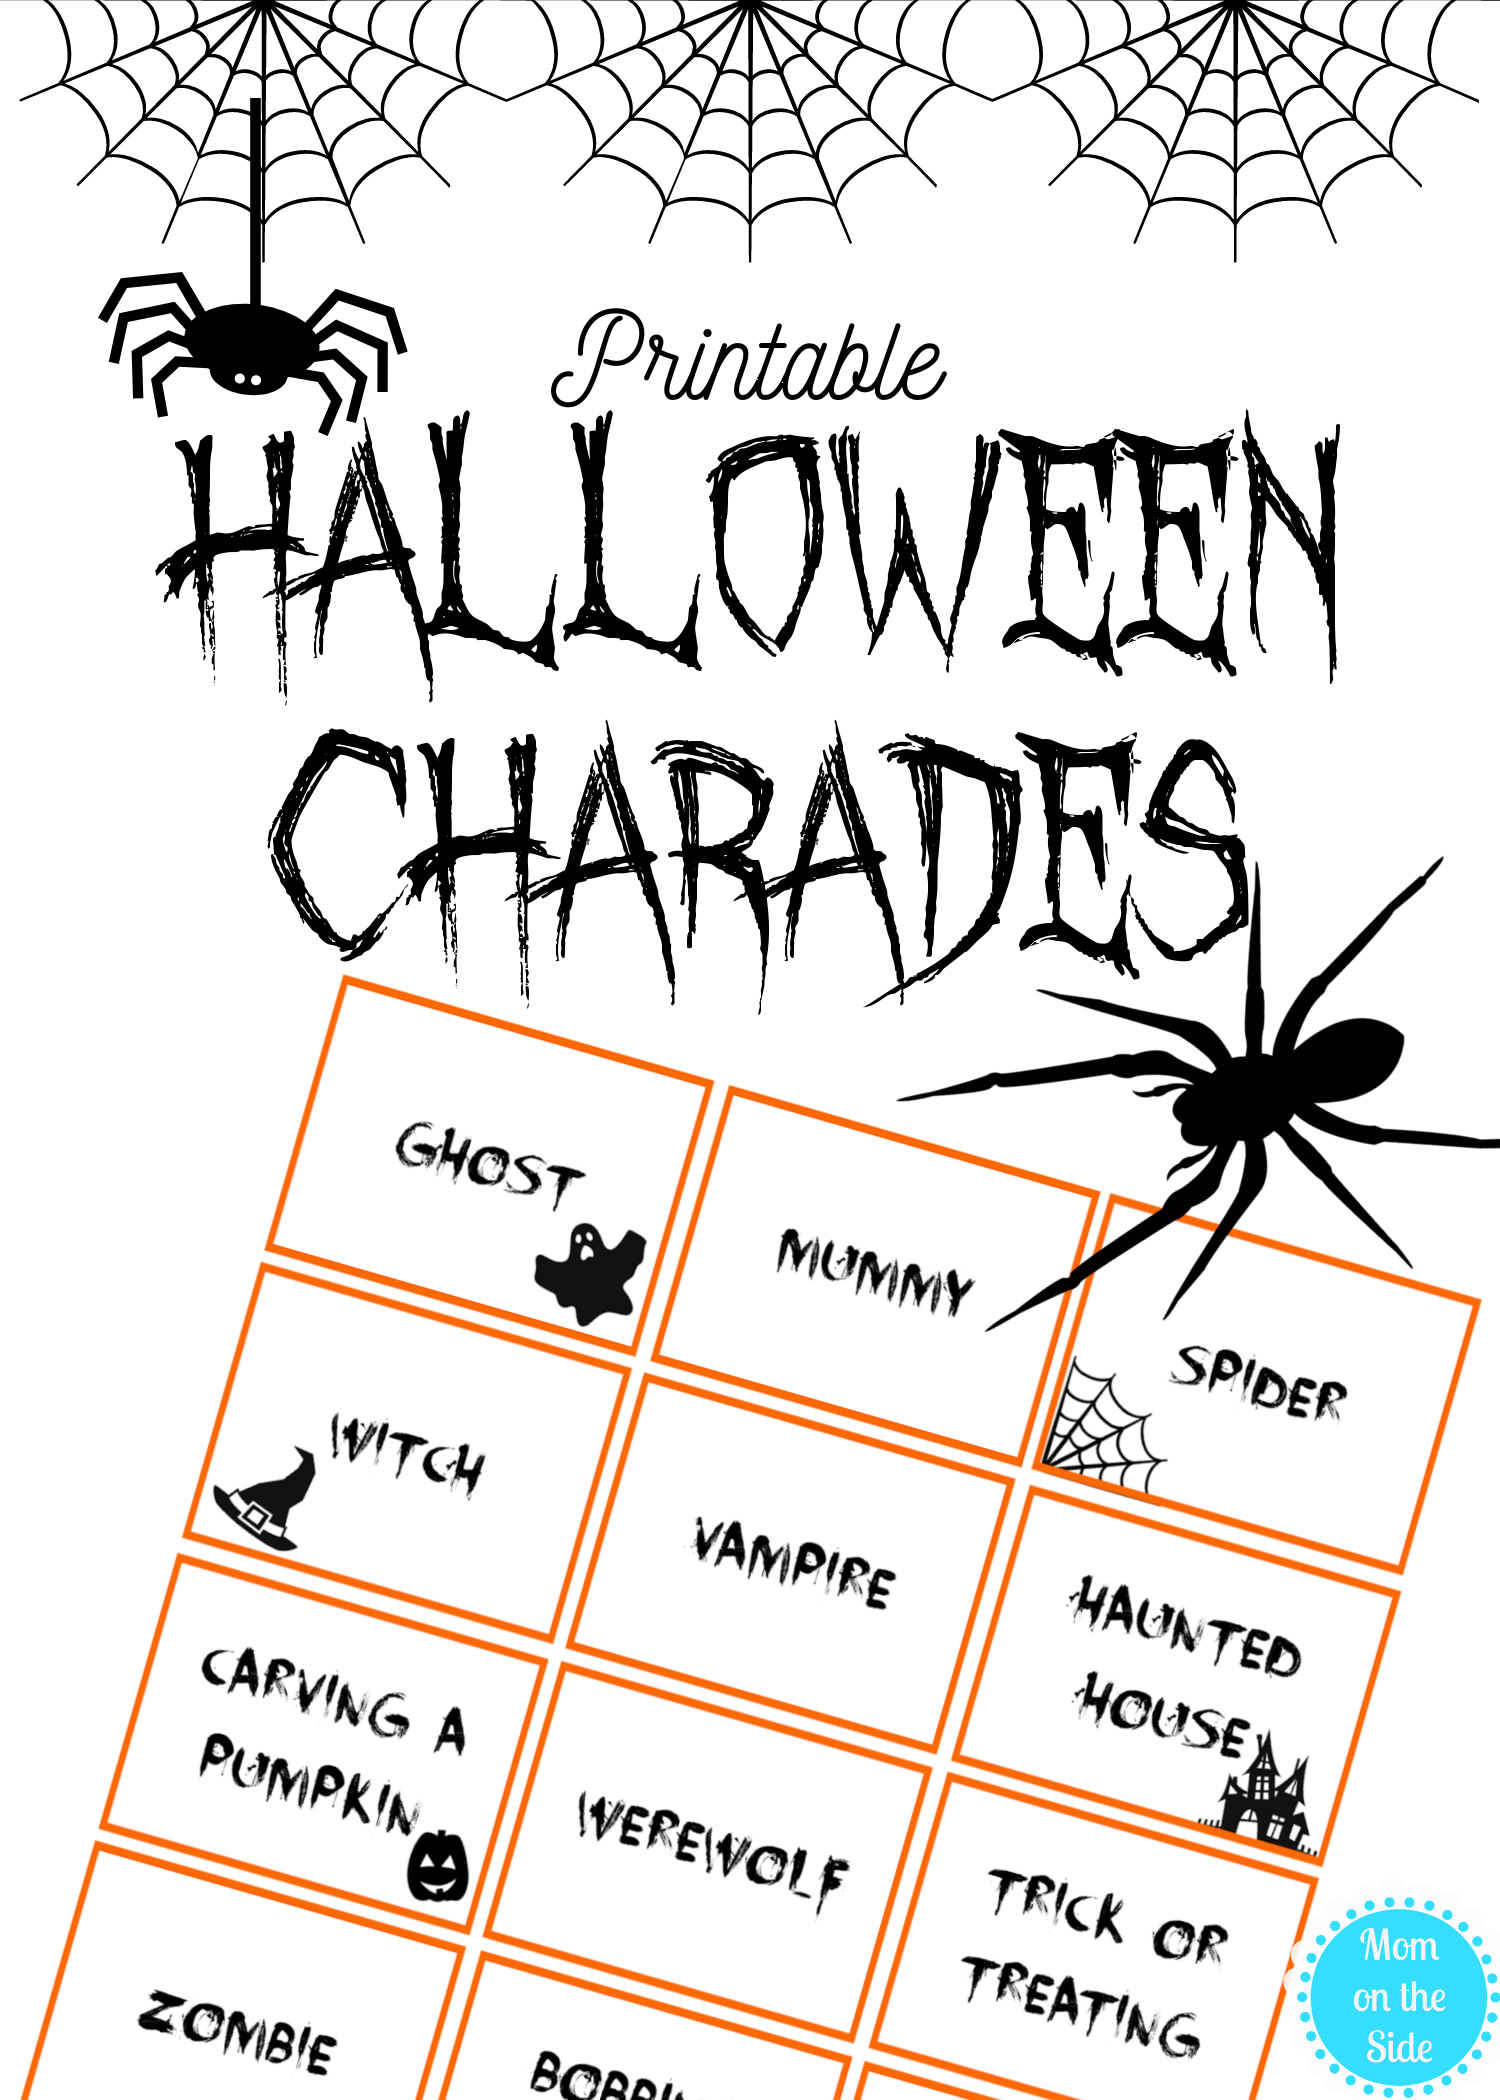 Halloween Charades Printable Cards For Halloween Family Game Night